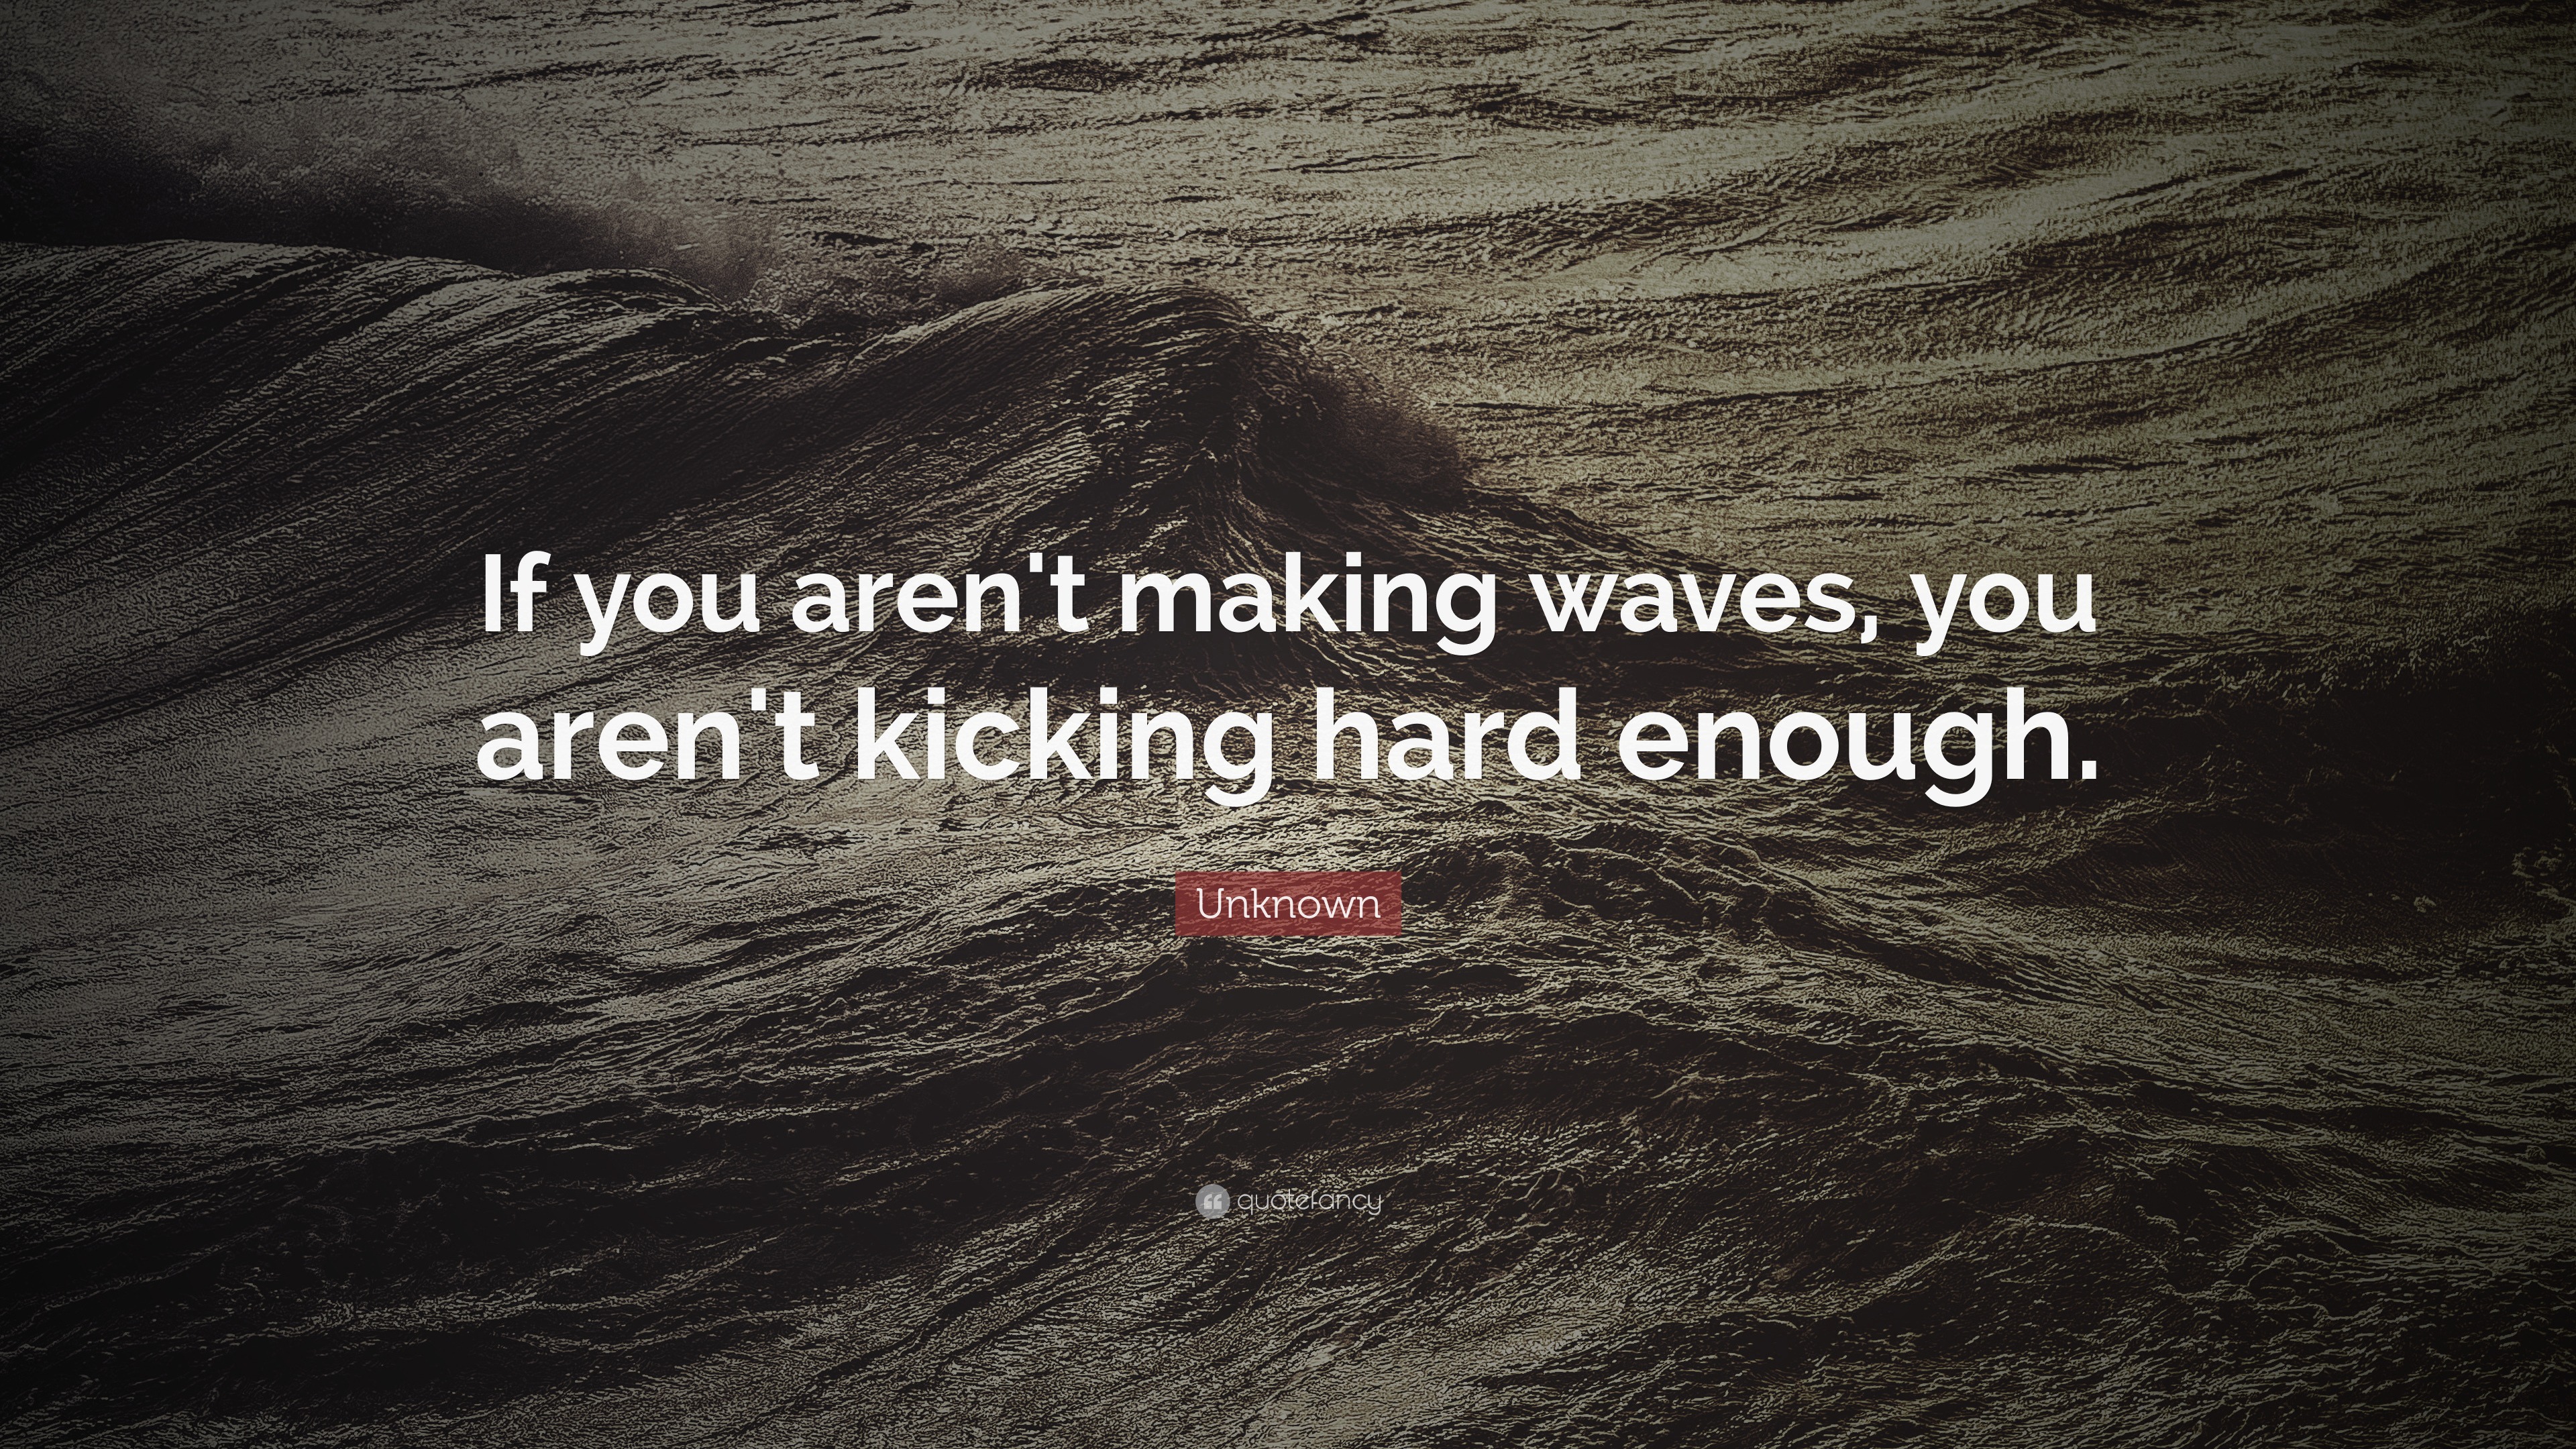 Unknown Quote: “If you aren't making waves, you aren't kicking hard